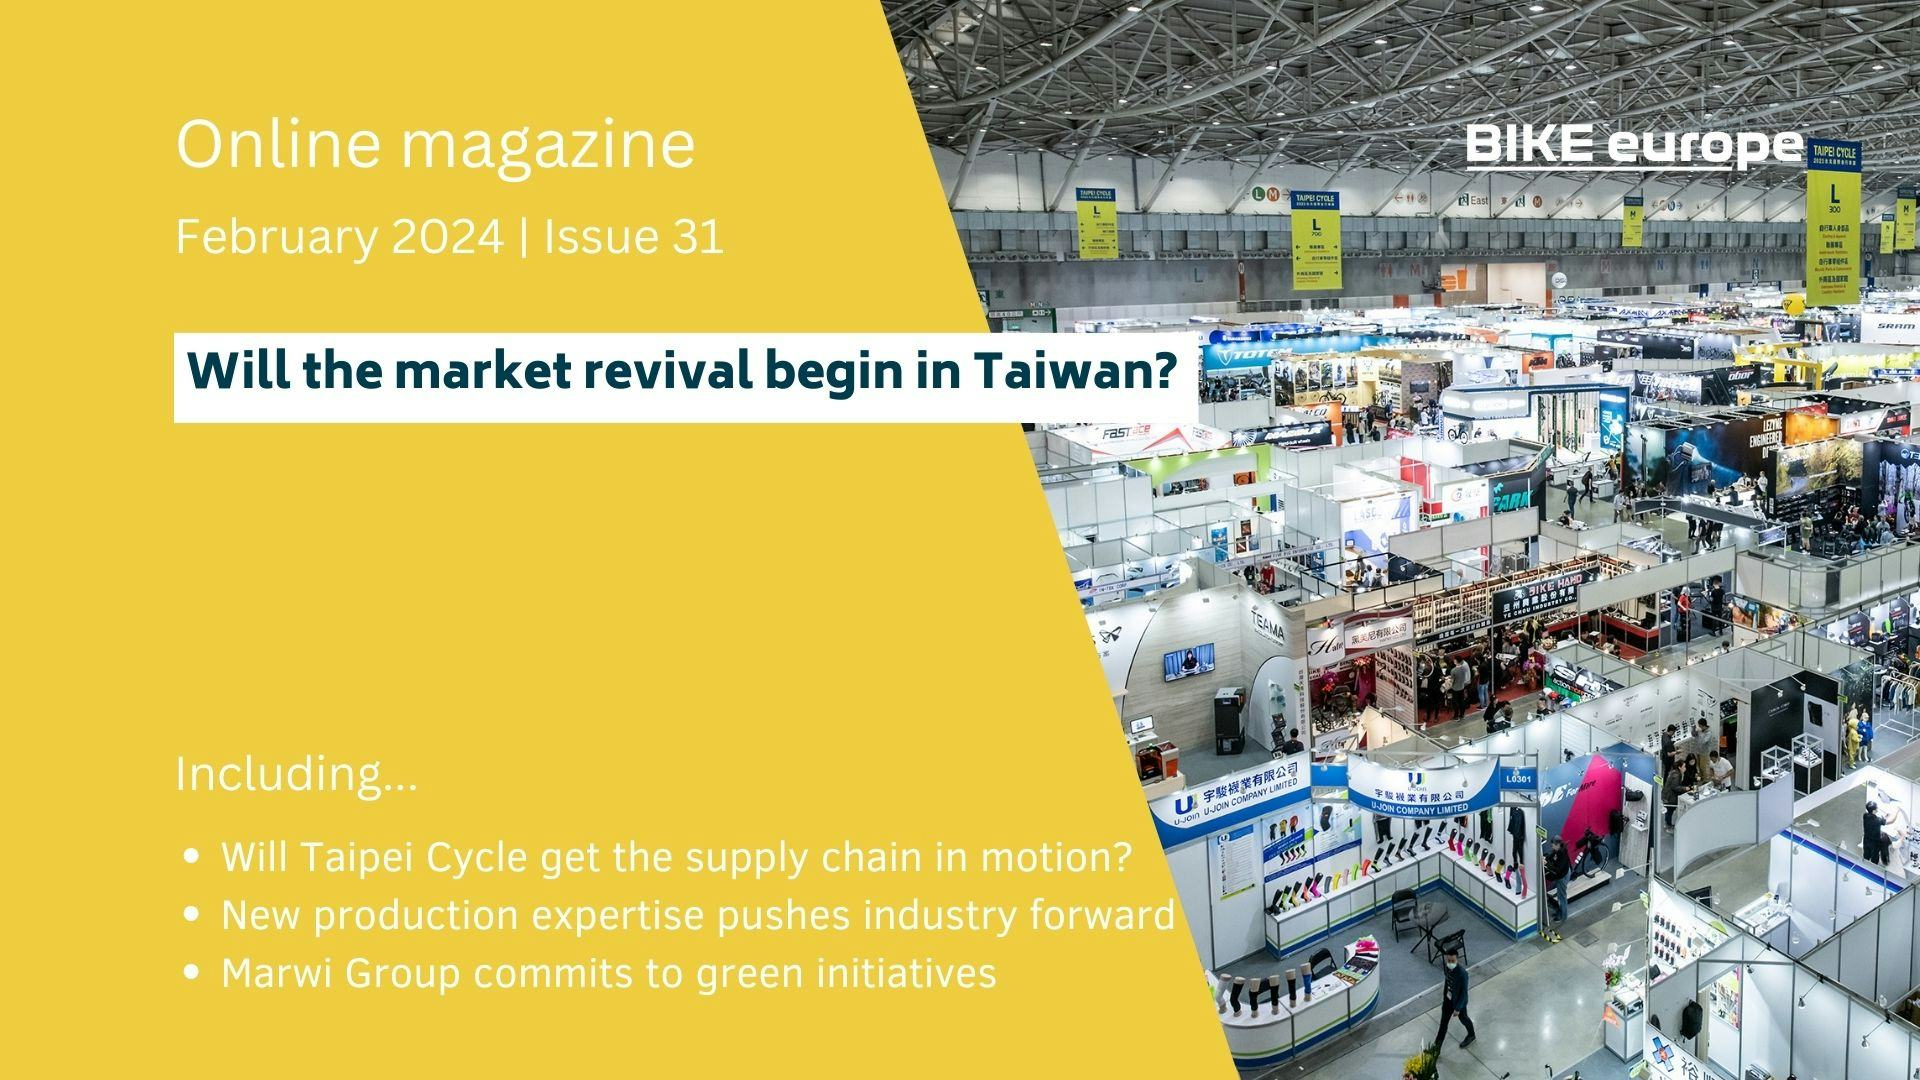 Will the market revival begin in Taiwan?